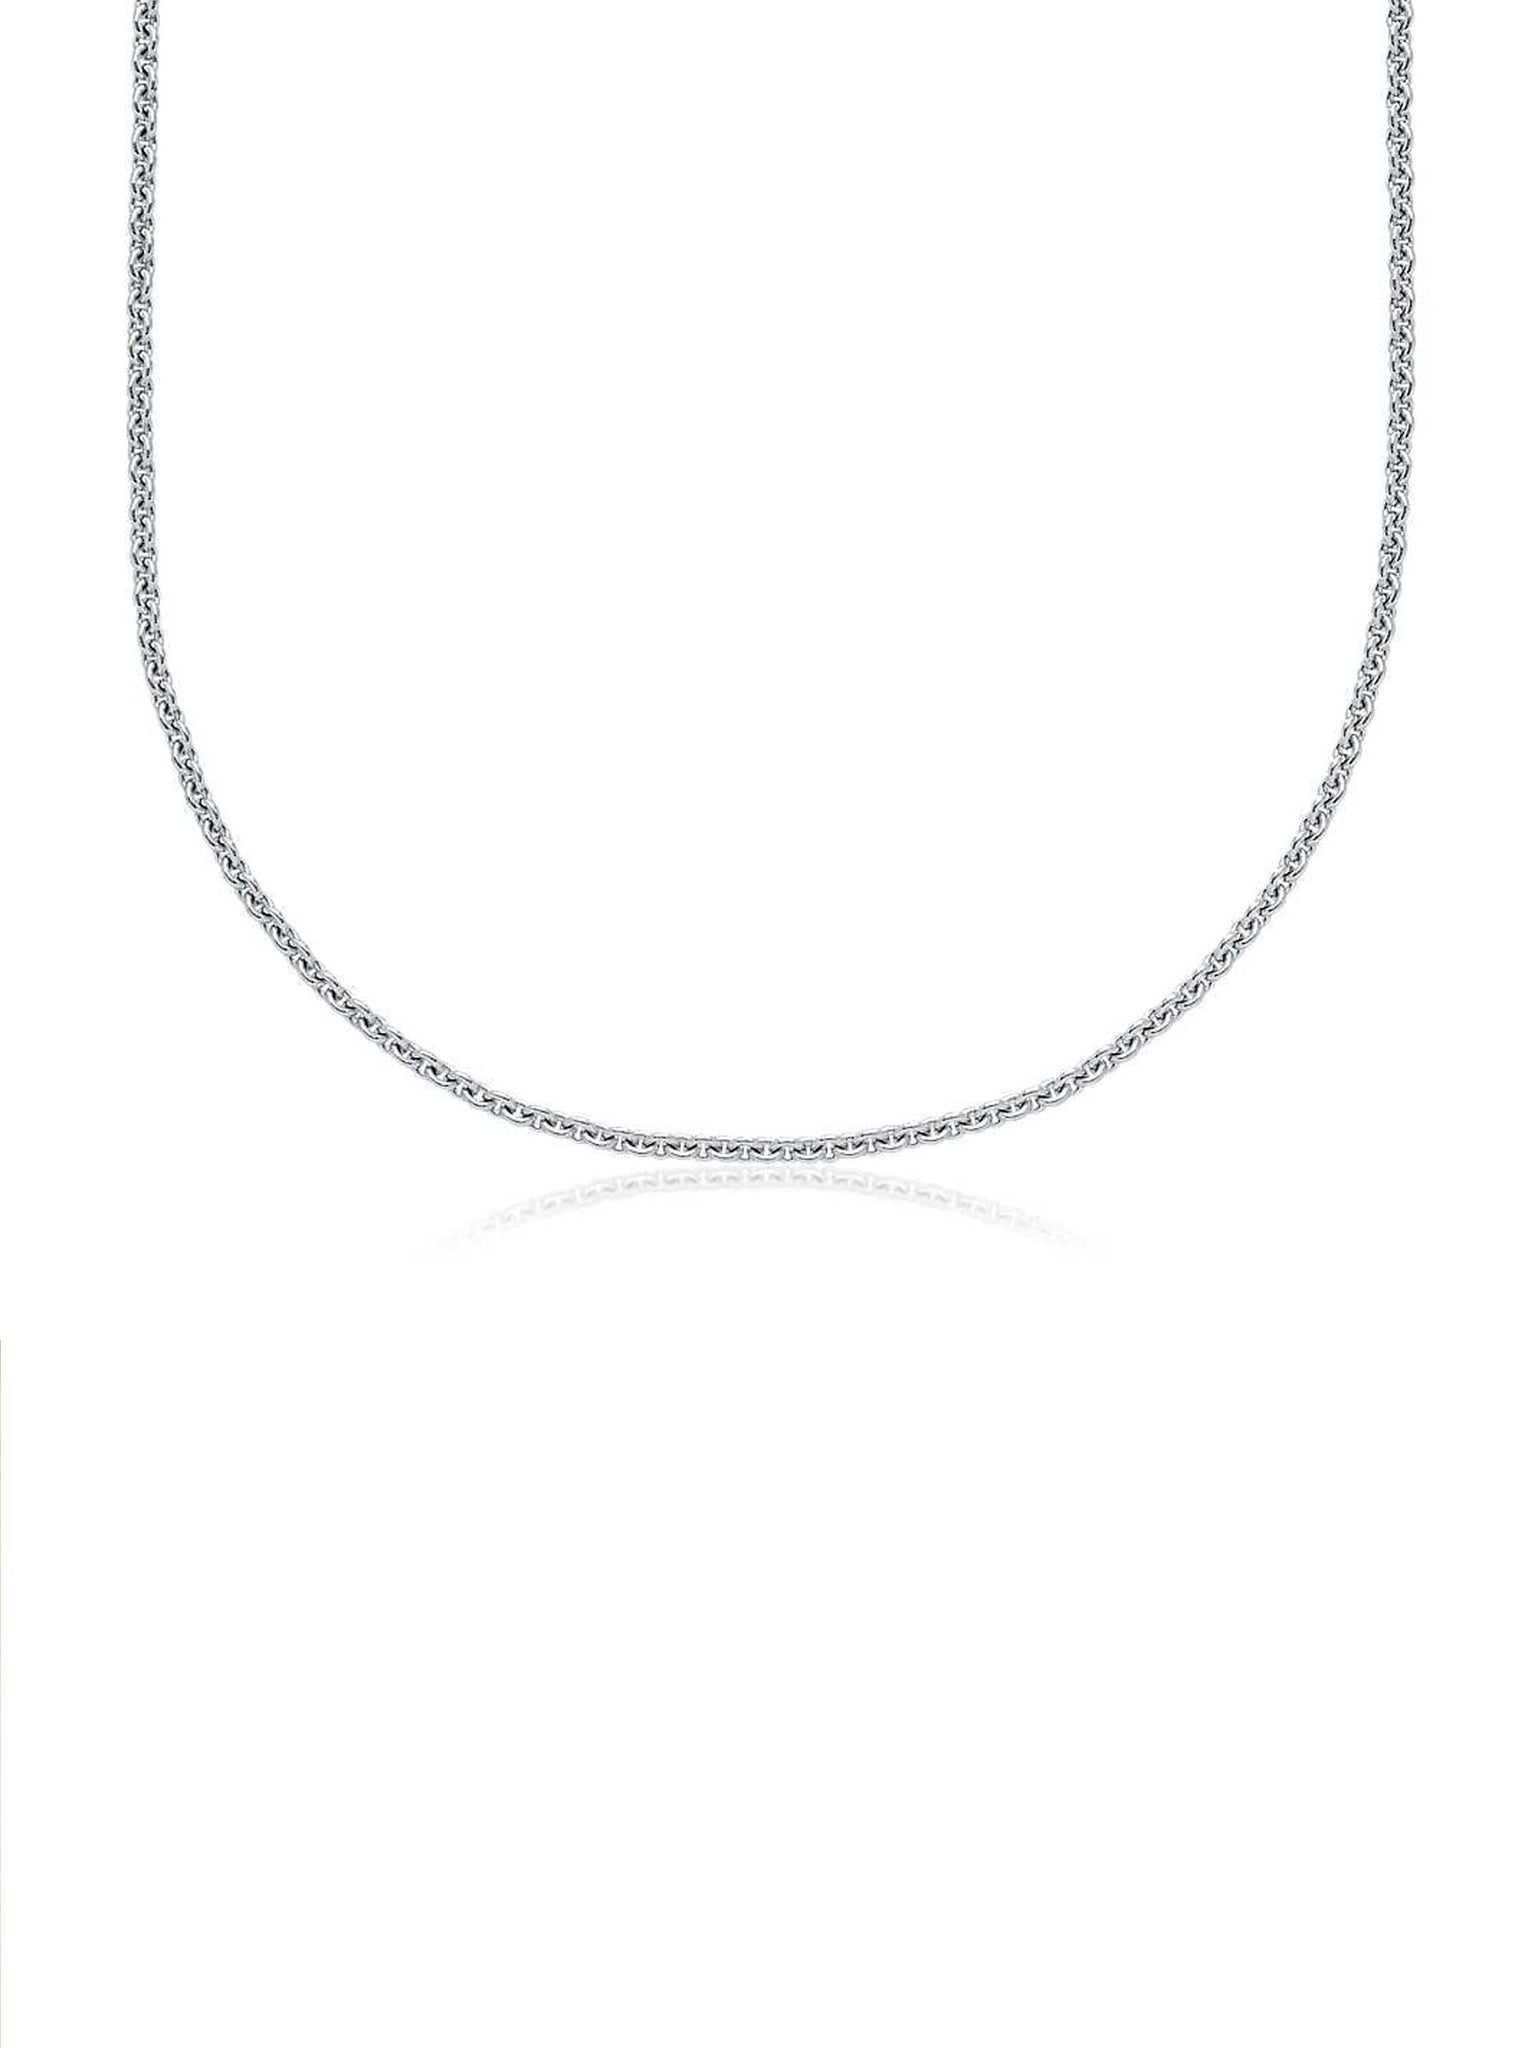 Single Sterling Silver chain